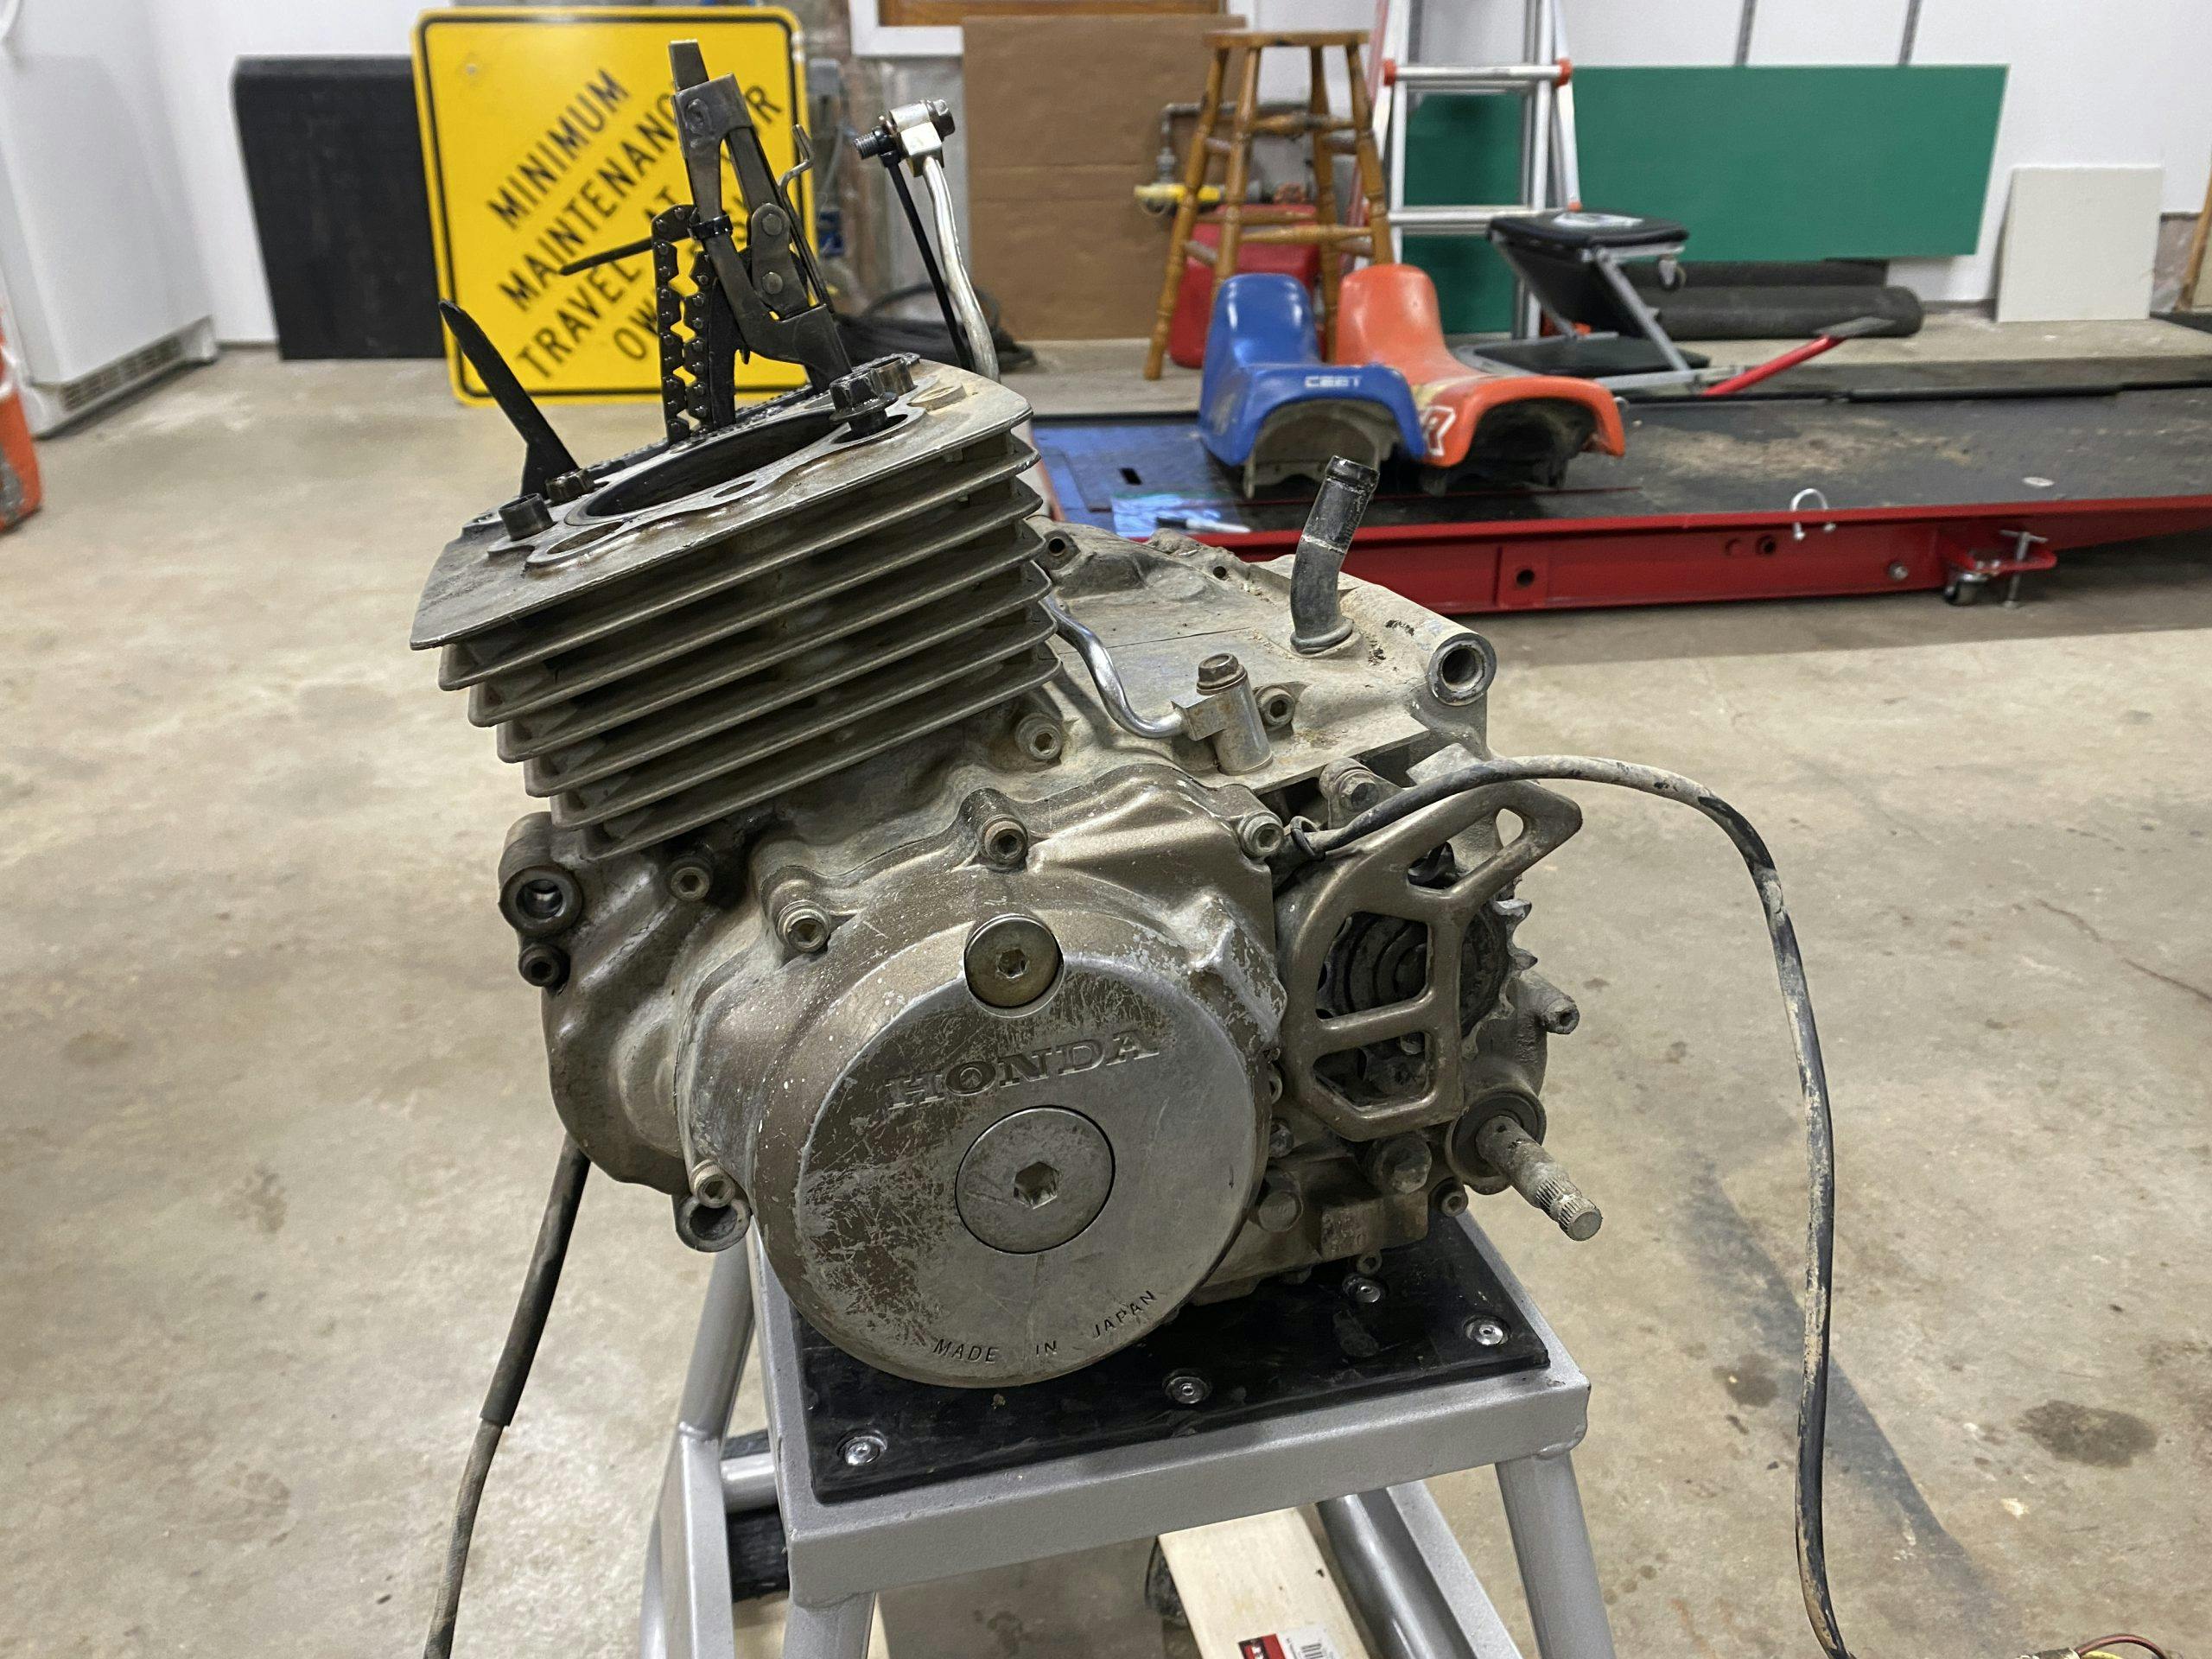 busted XR250 engine